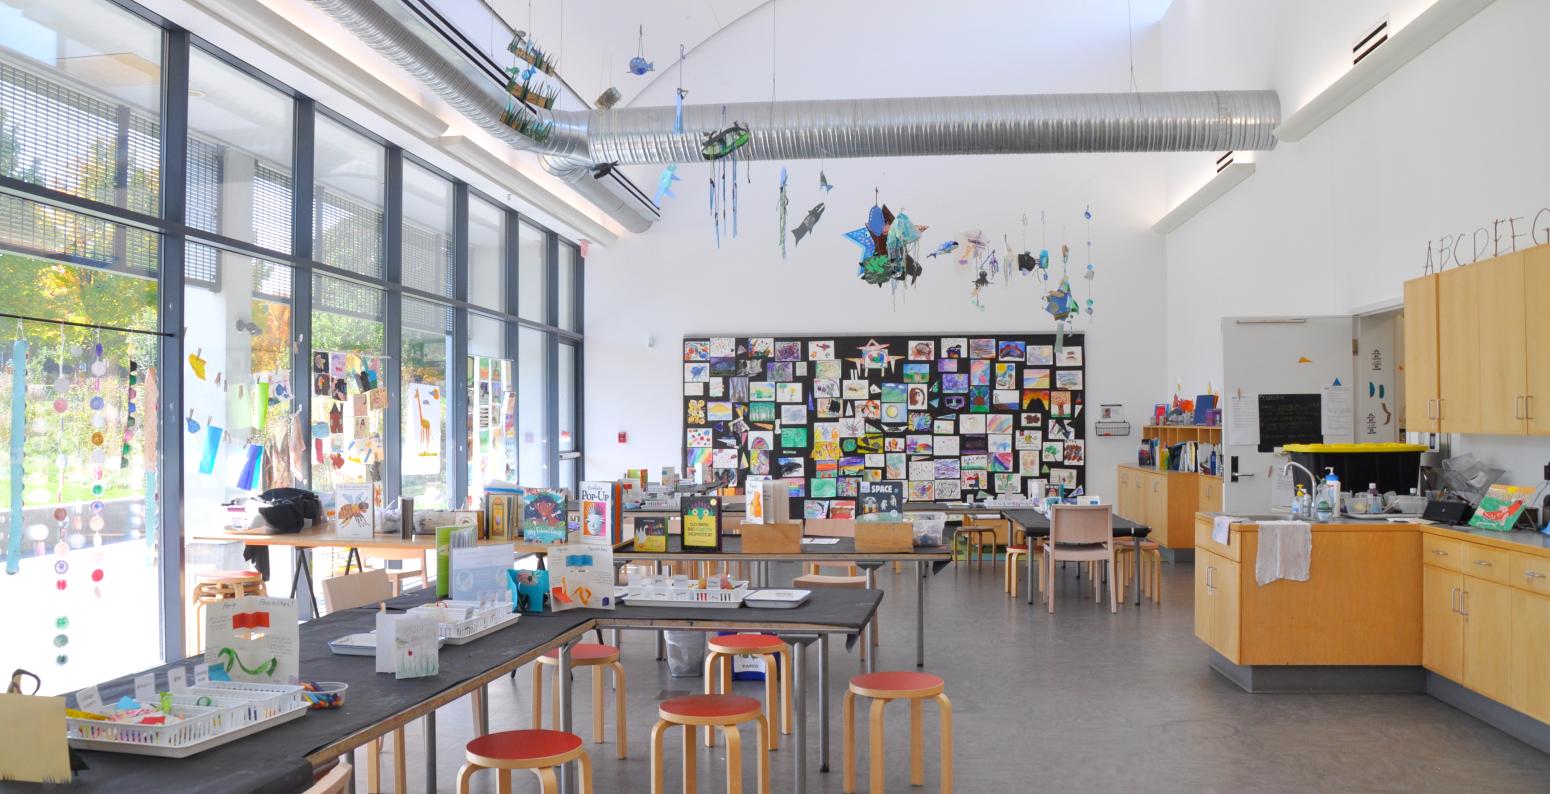 An open Art Studio with artworks on display, stools and chairs, and bright light streaming through the windows.